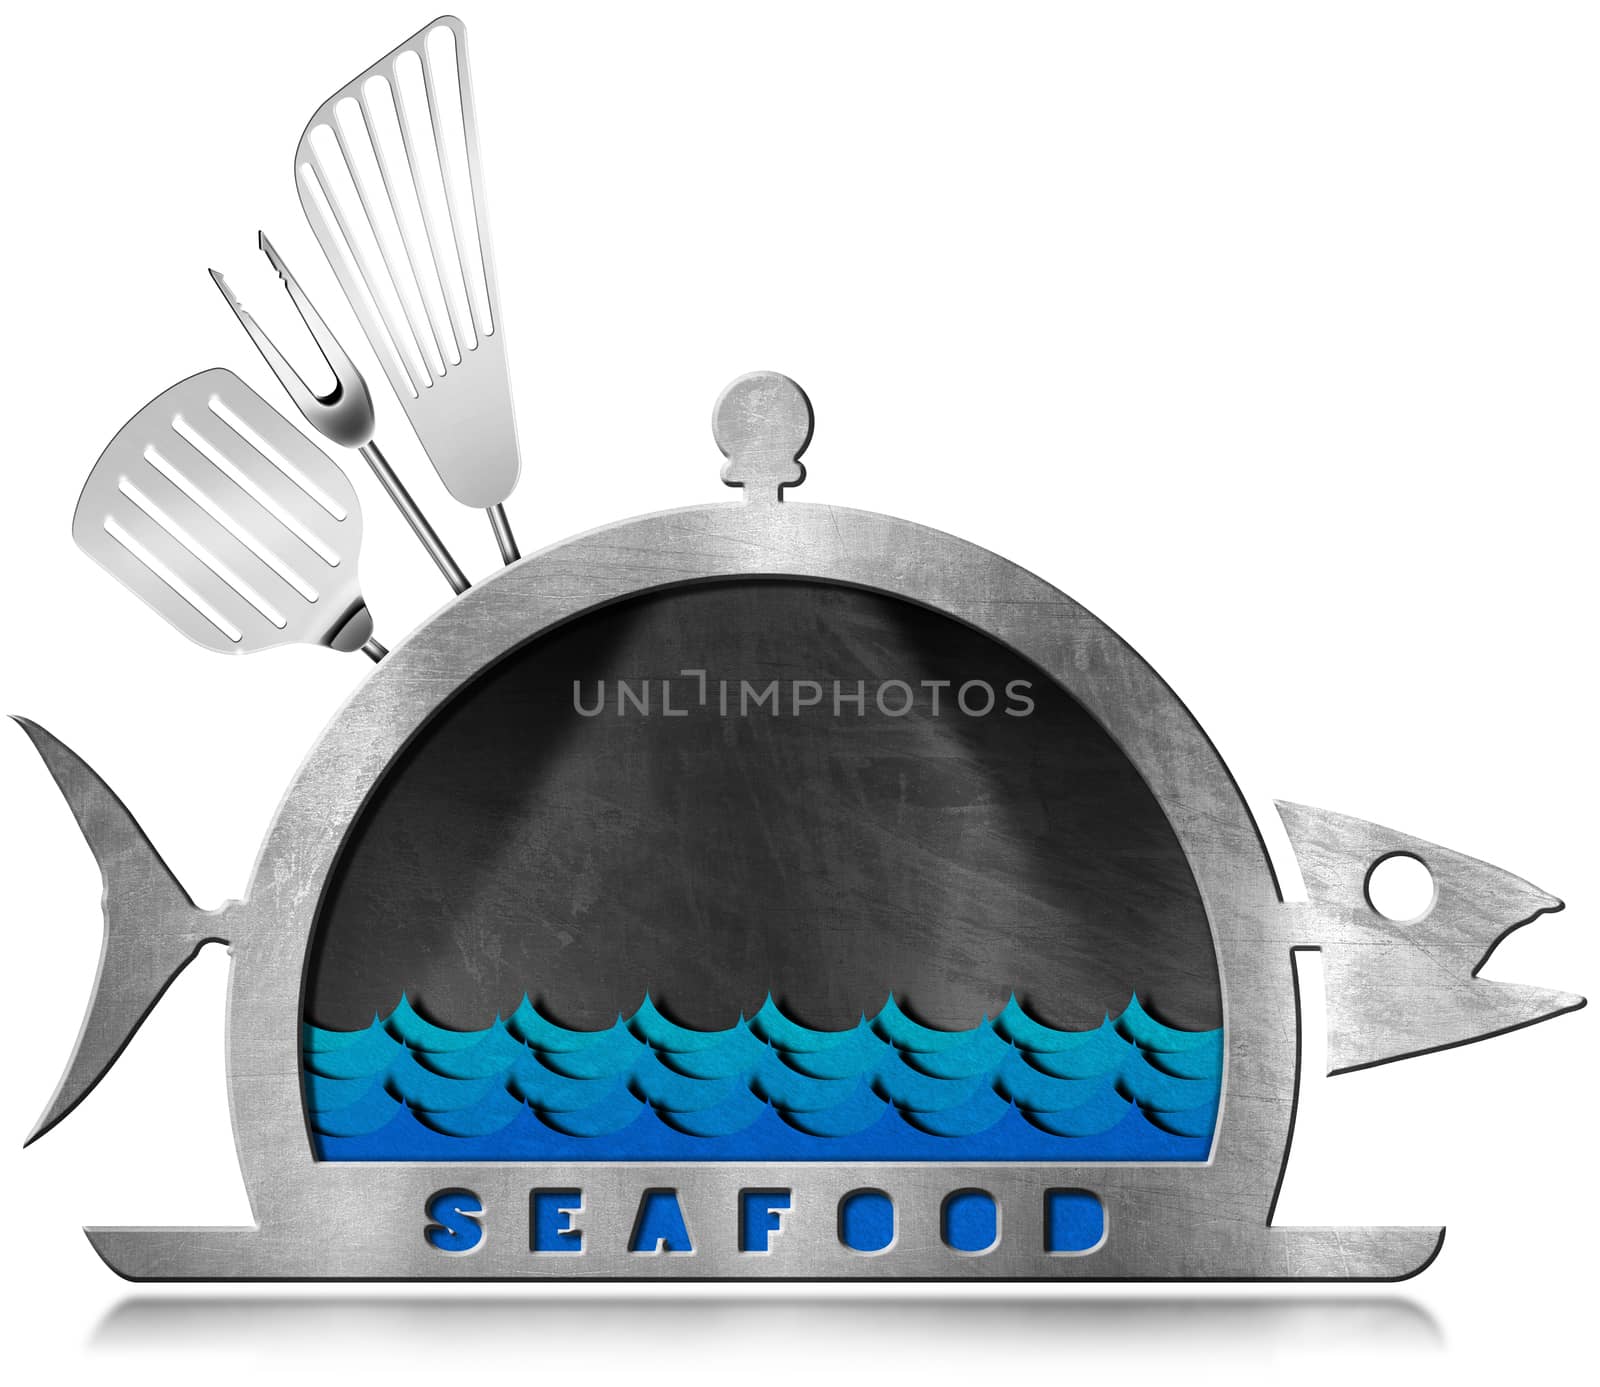 Blackboard with steel frame in the shape of fish and serving dome with kitchen utensils, text Seafood and sea waves. Isolated on white background